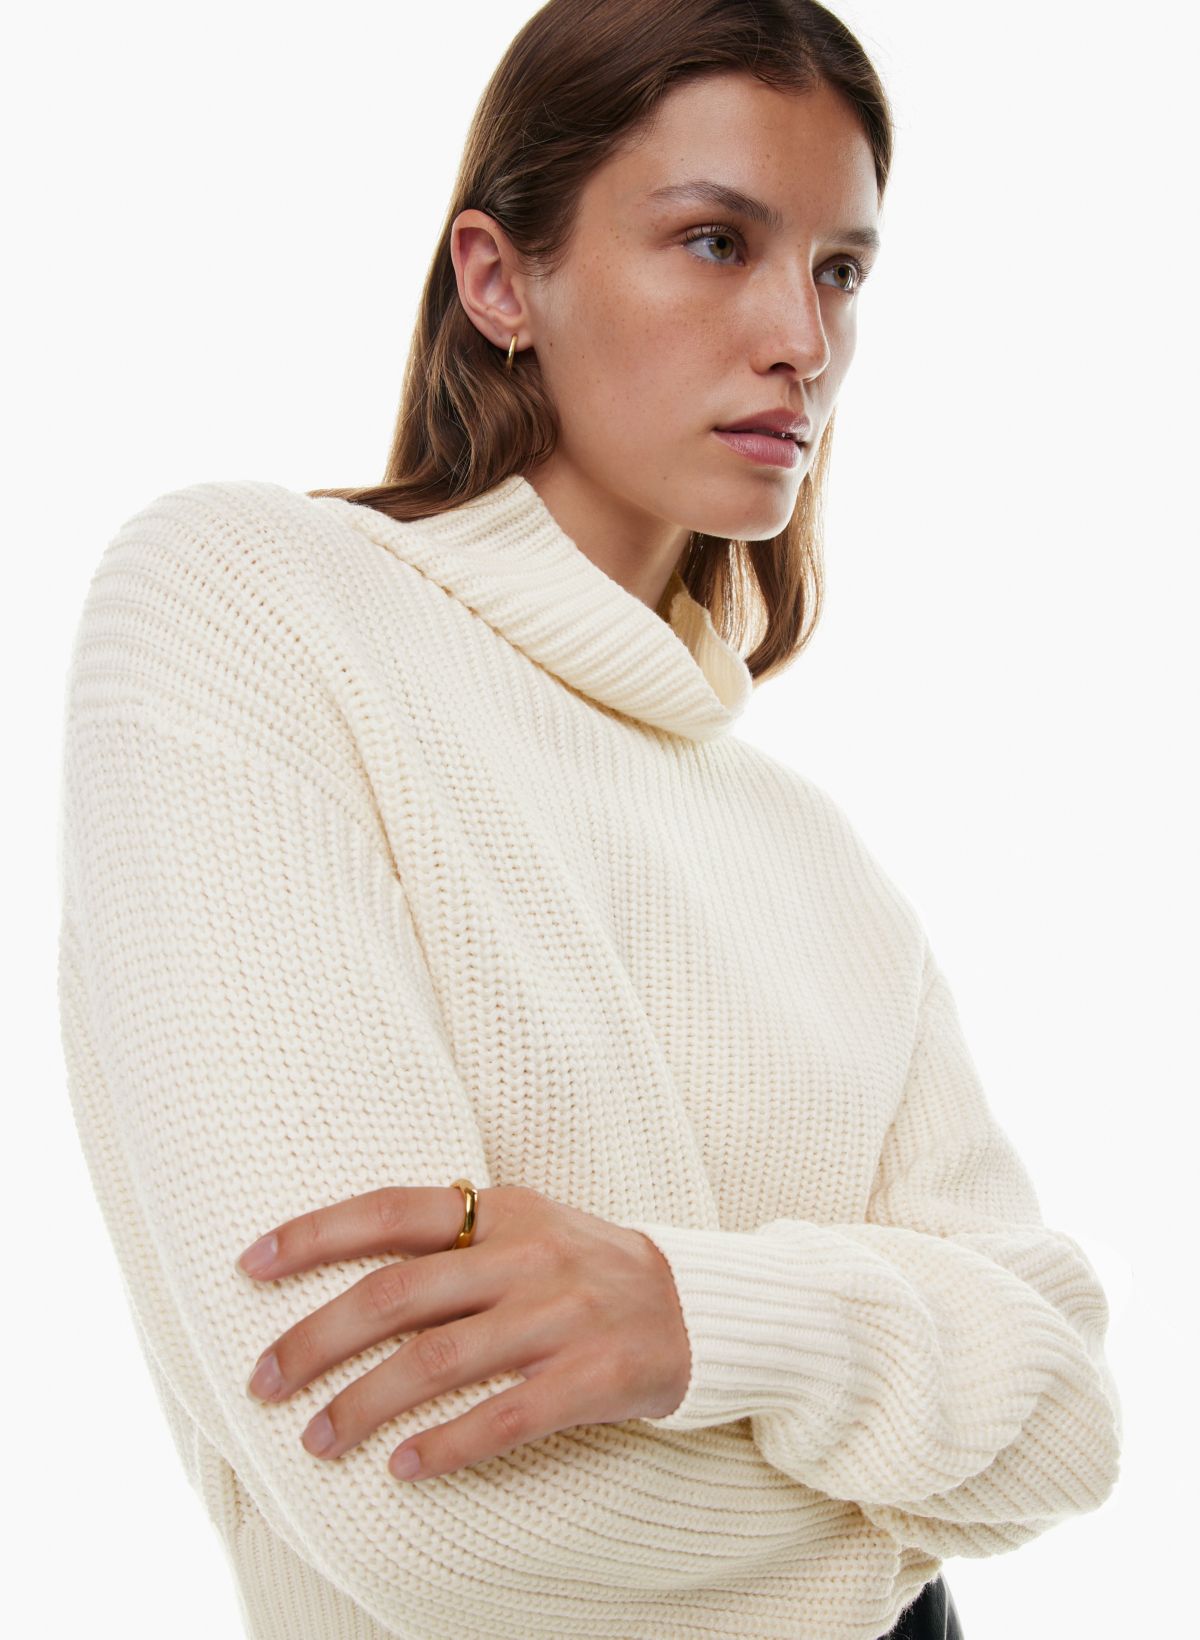 Ten of The Best Chic and Cozy Turtlenecks - 50 IS NOT OLD - A